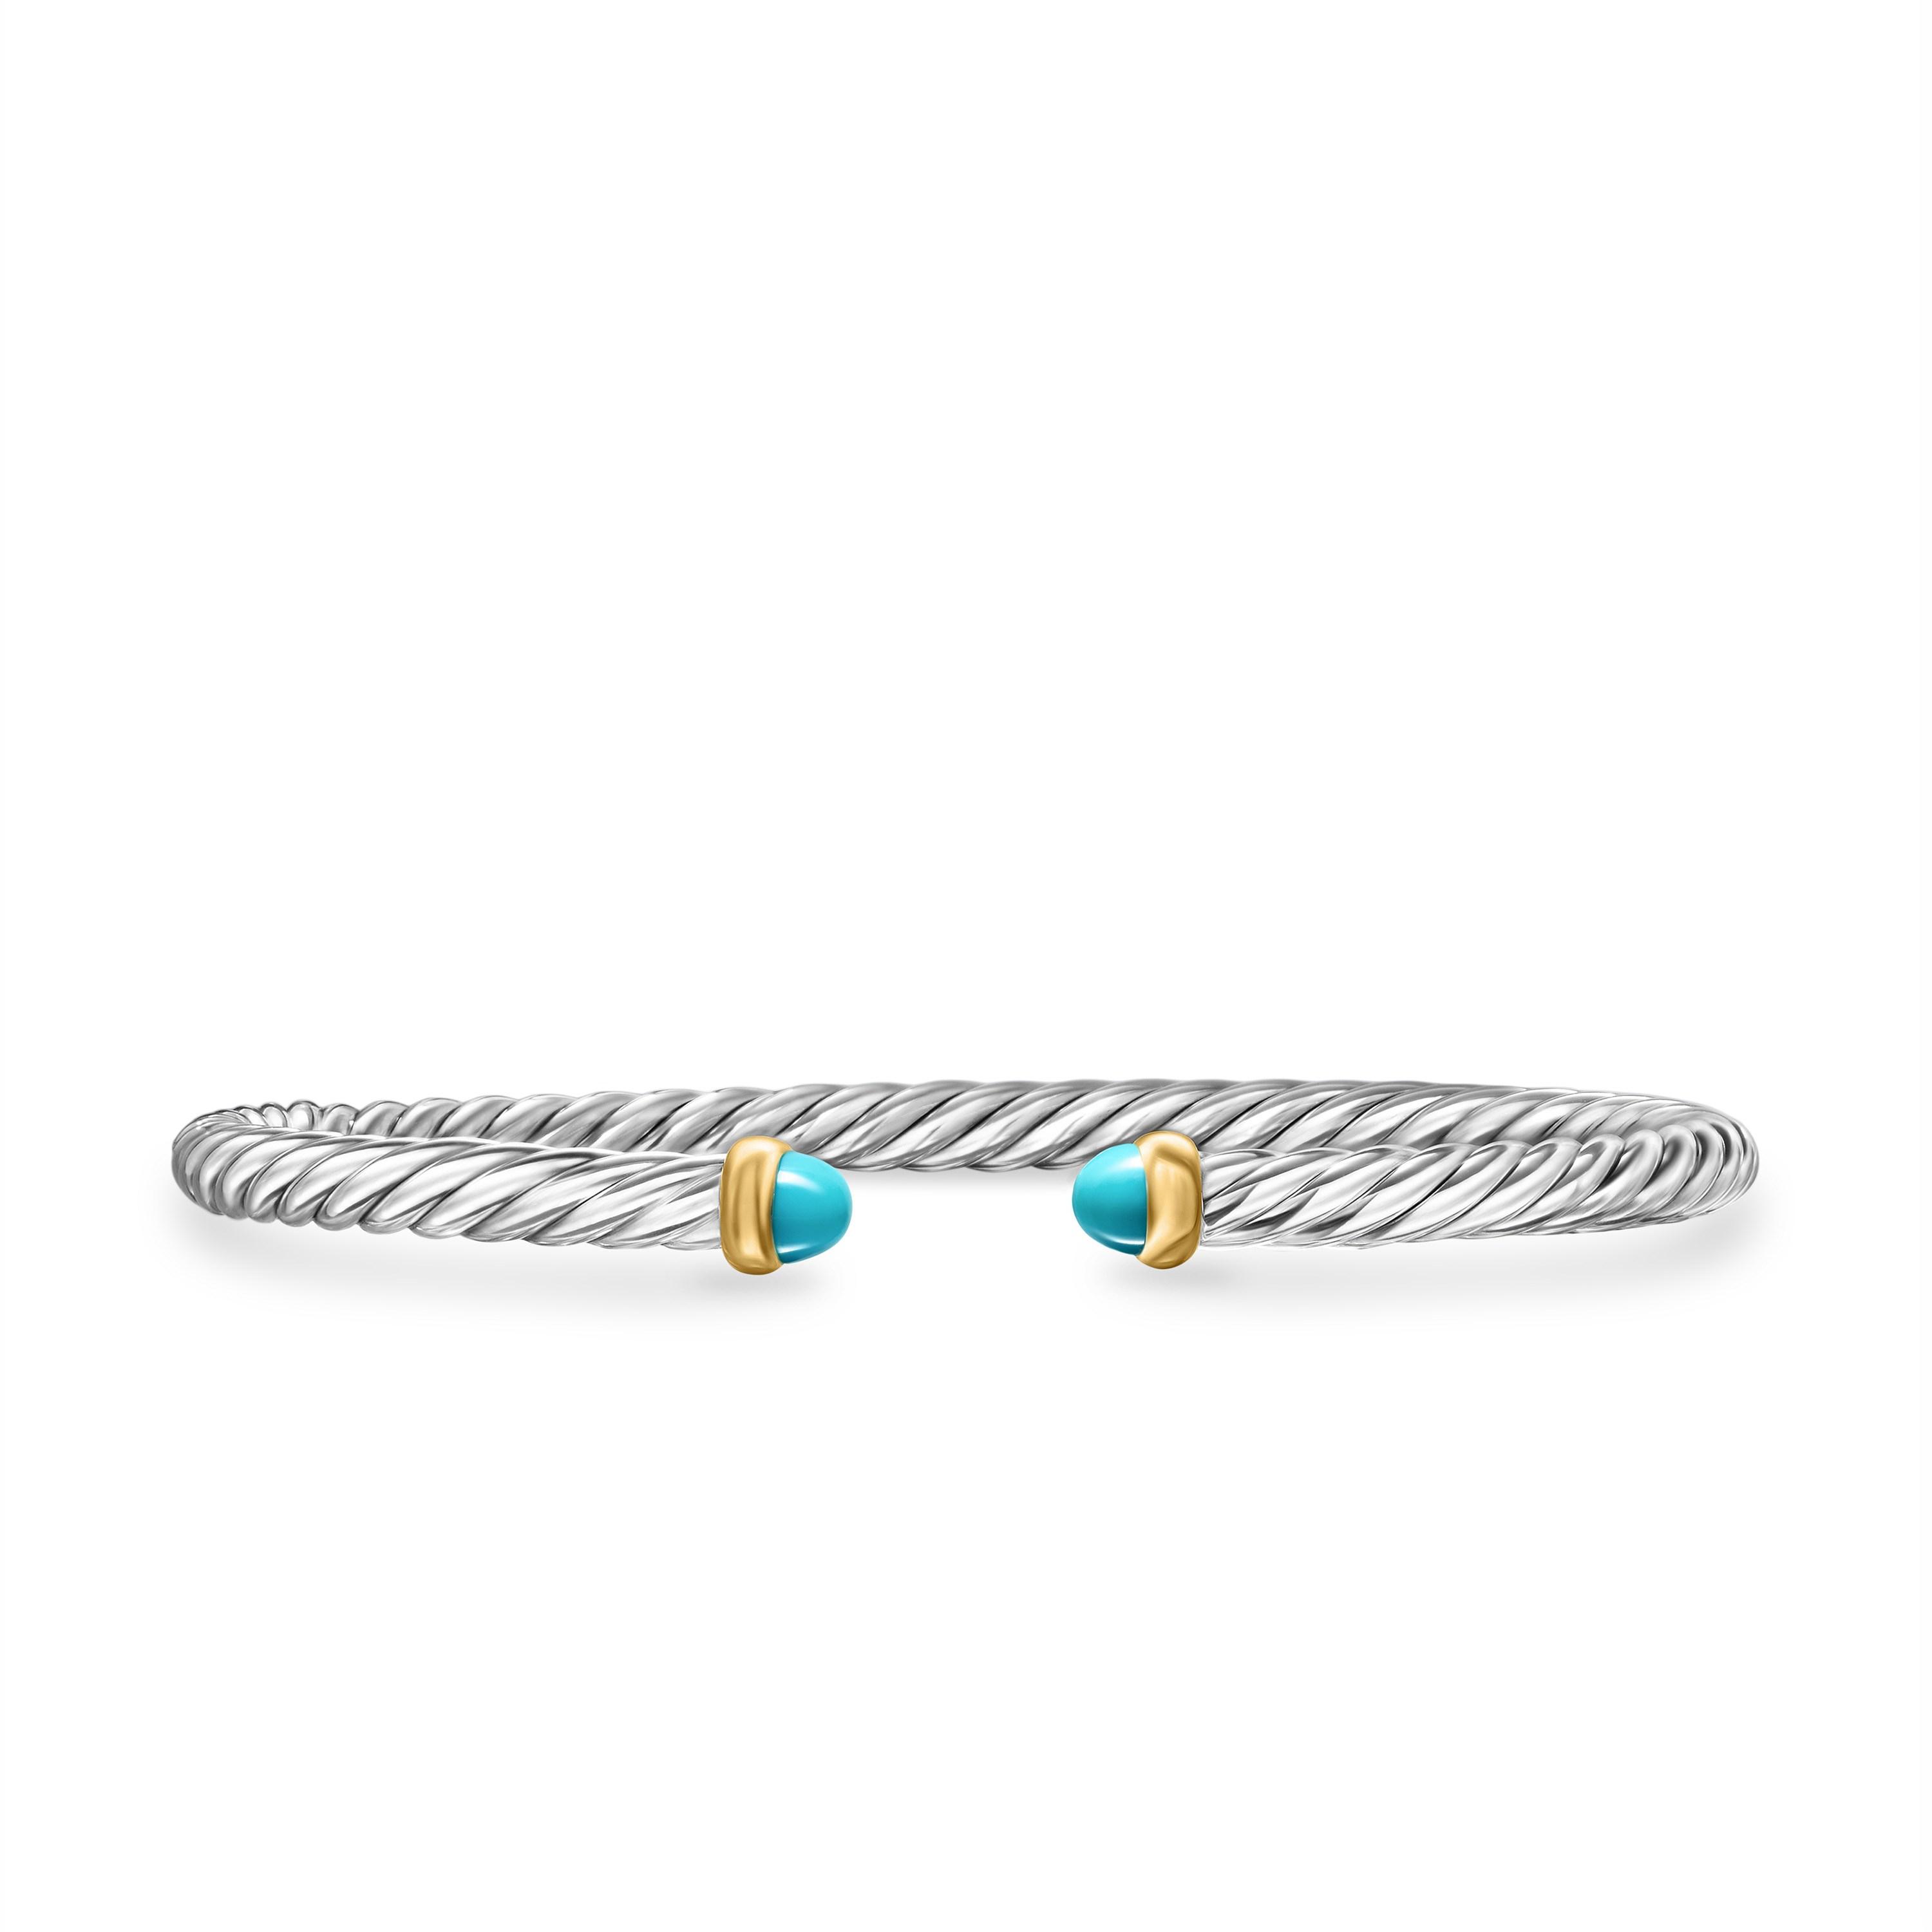 David Yurman Cable Flex Sterling Silver Bracelet with Turquoise, Size Large